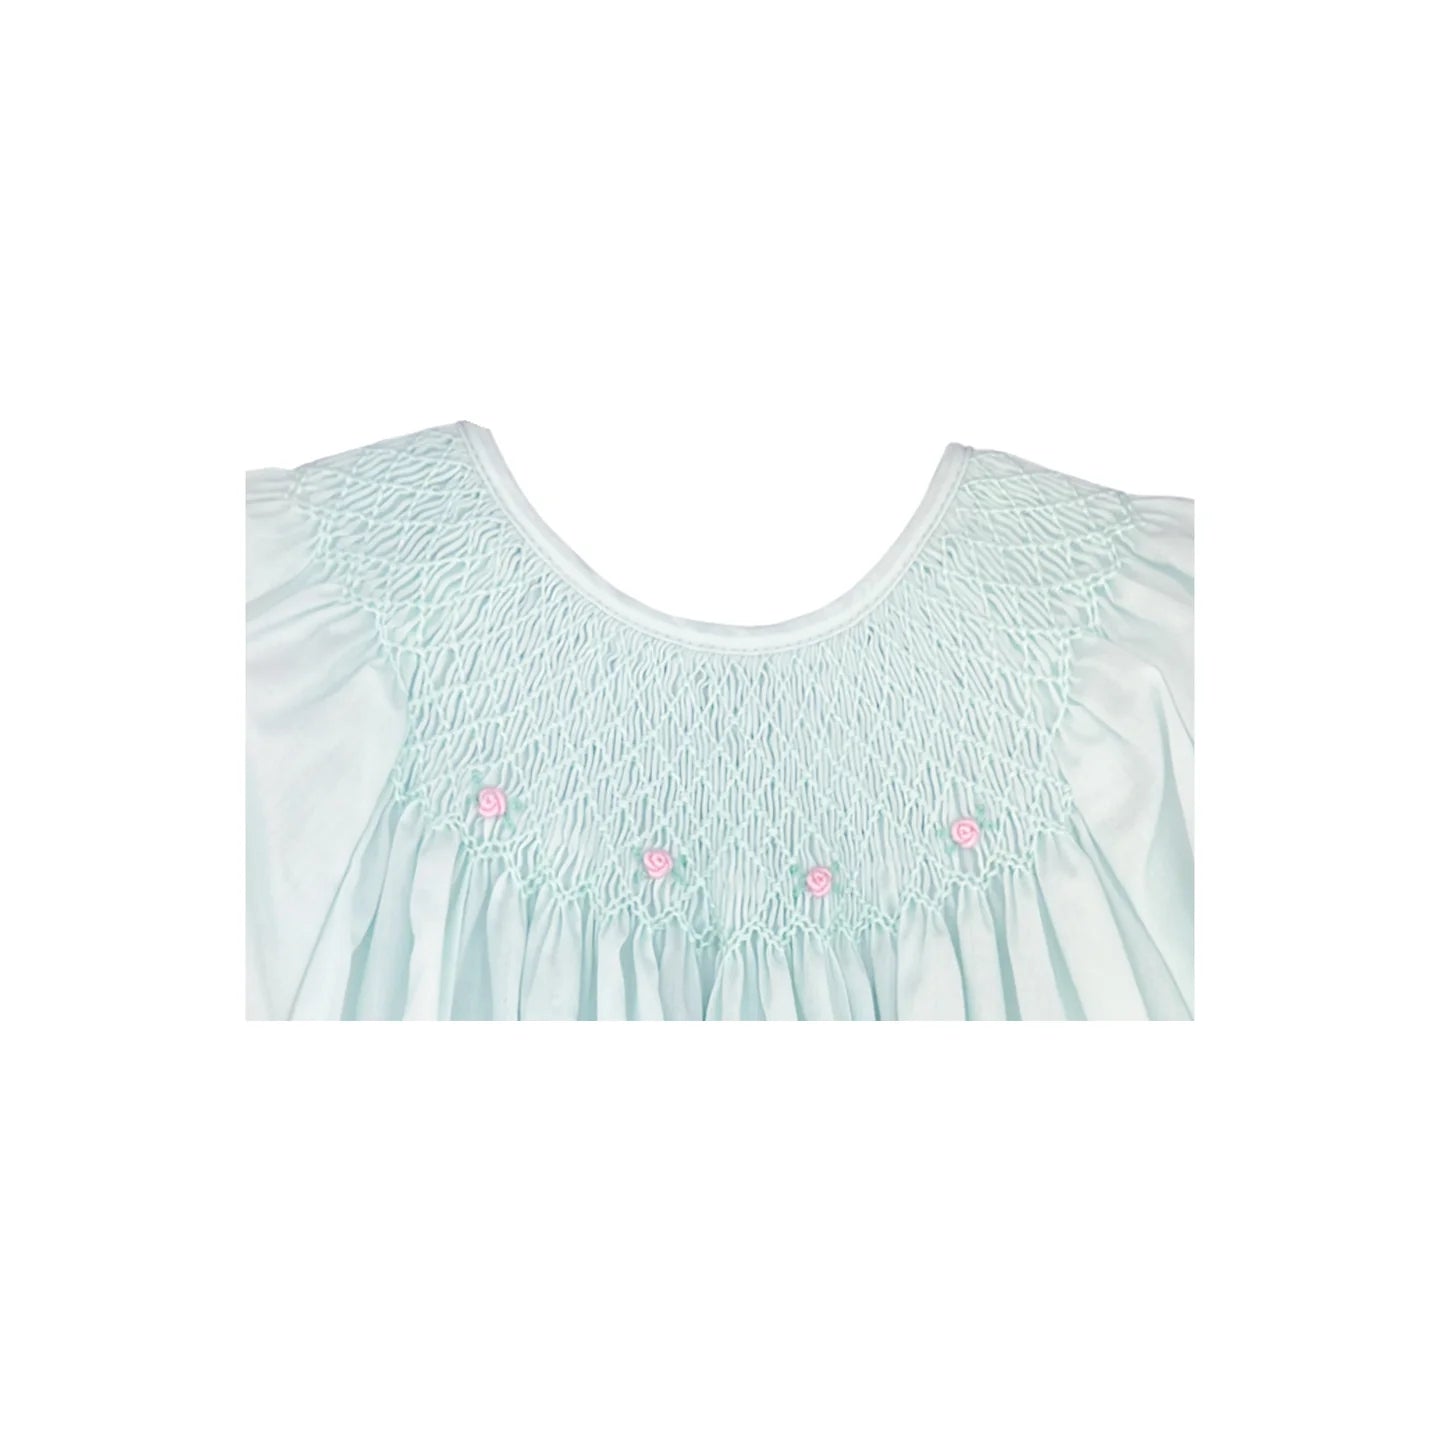 Petit Ami- Smocked Daygown with Raglan Embroidery